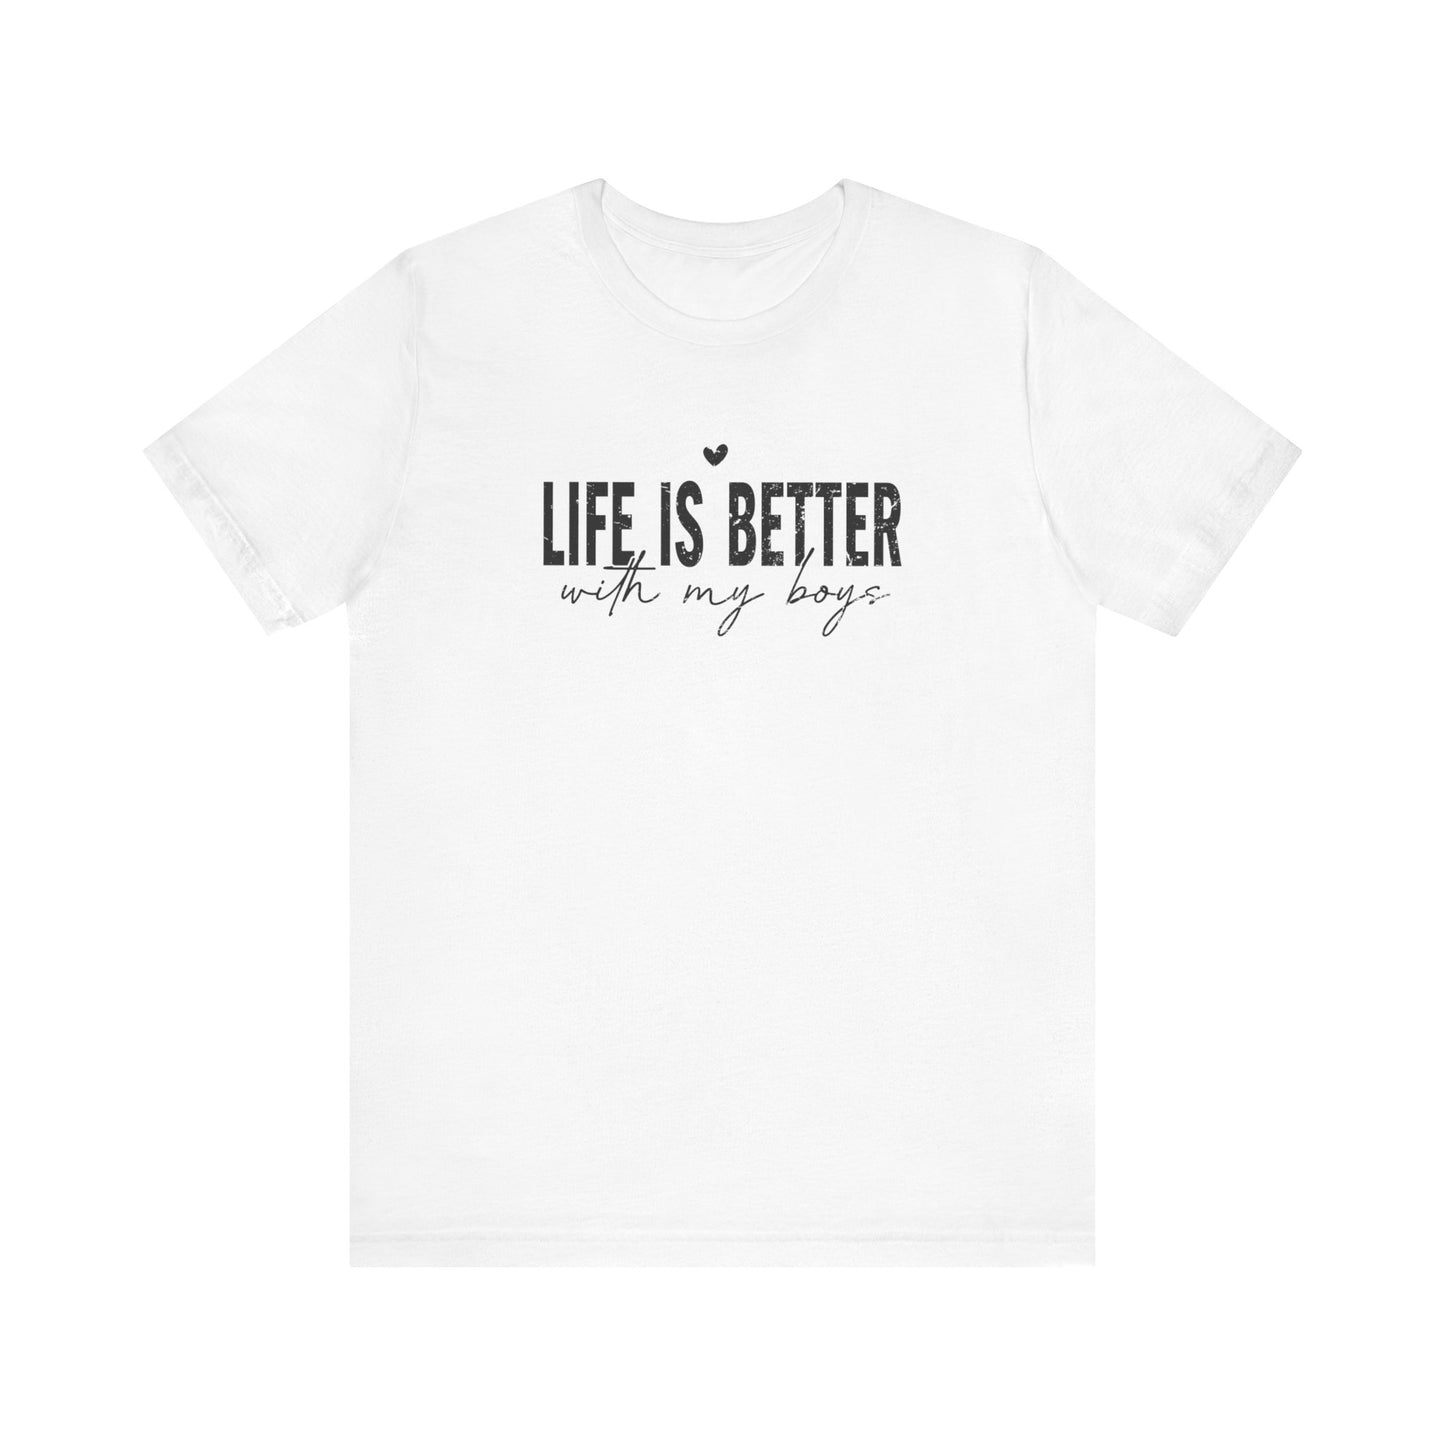 Life Is Better With My Boys Shirt, Mother's Day Gift, Mom Tee, Mama Tshirt (Mom-54)